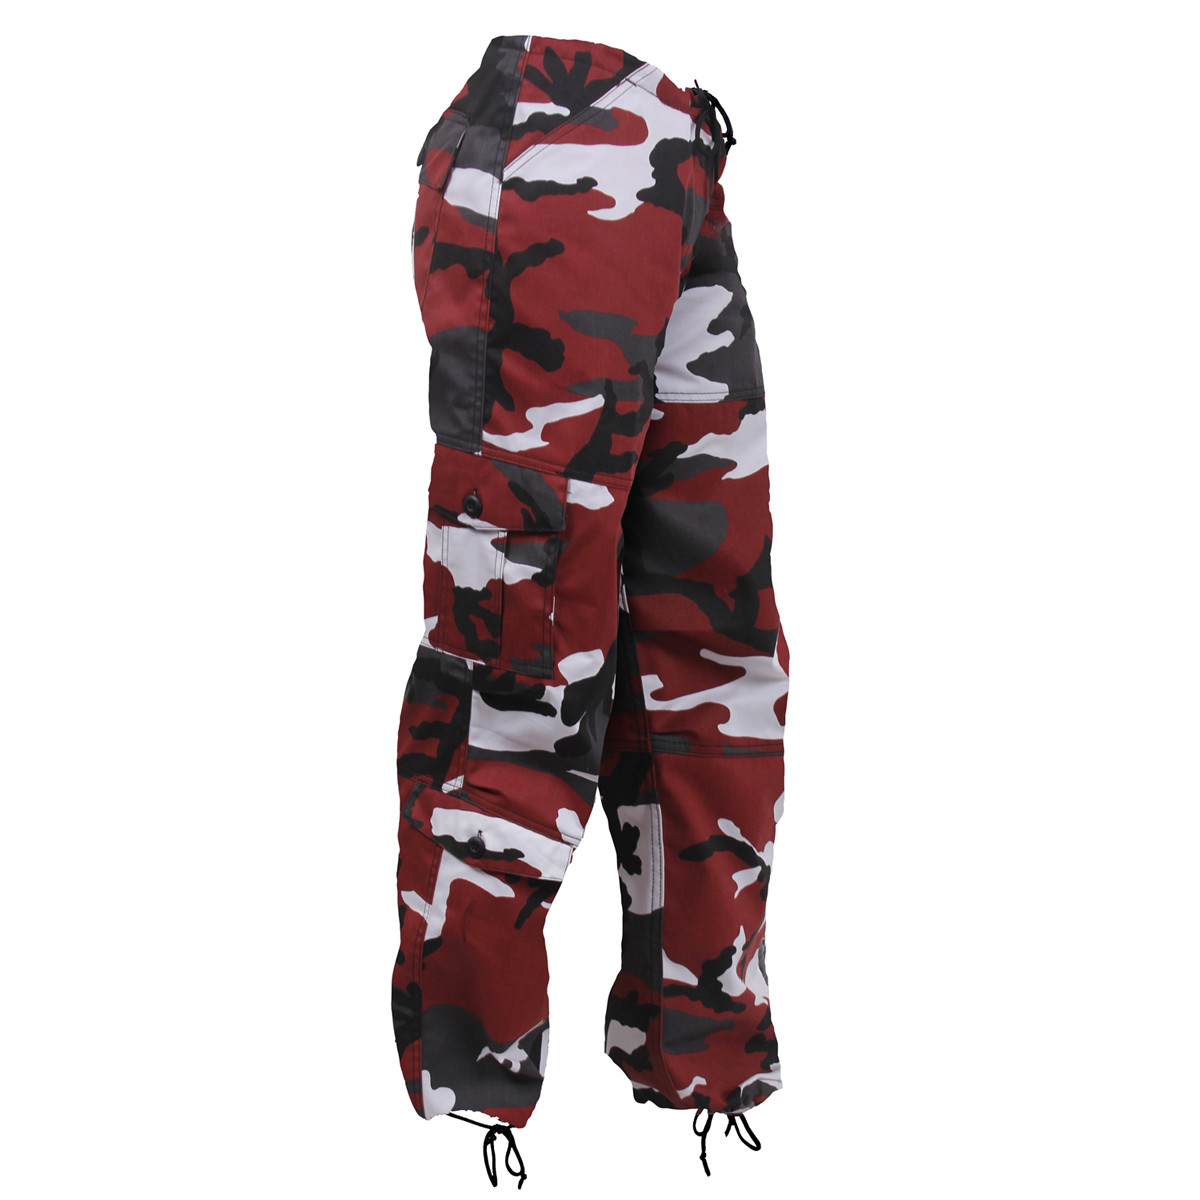 Shop Womens Red Camo Fatigue Pants - Fatigues Army Navy Gear